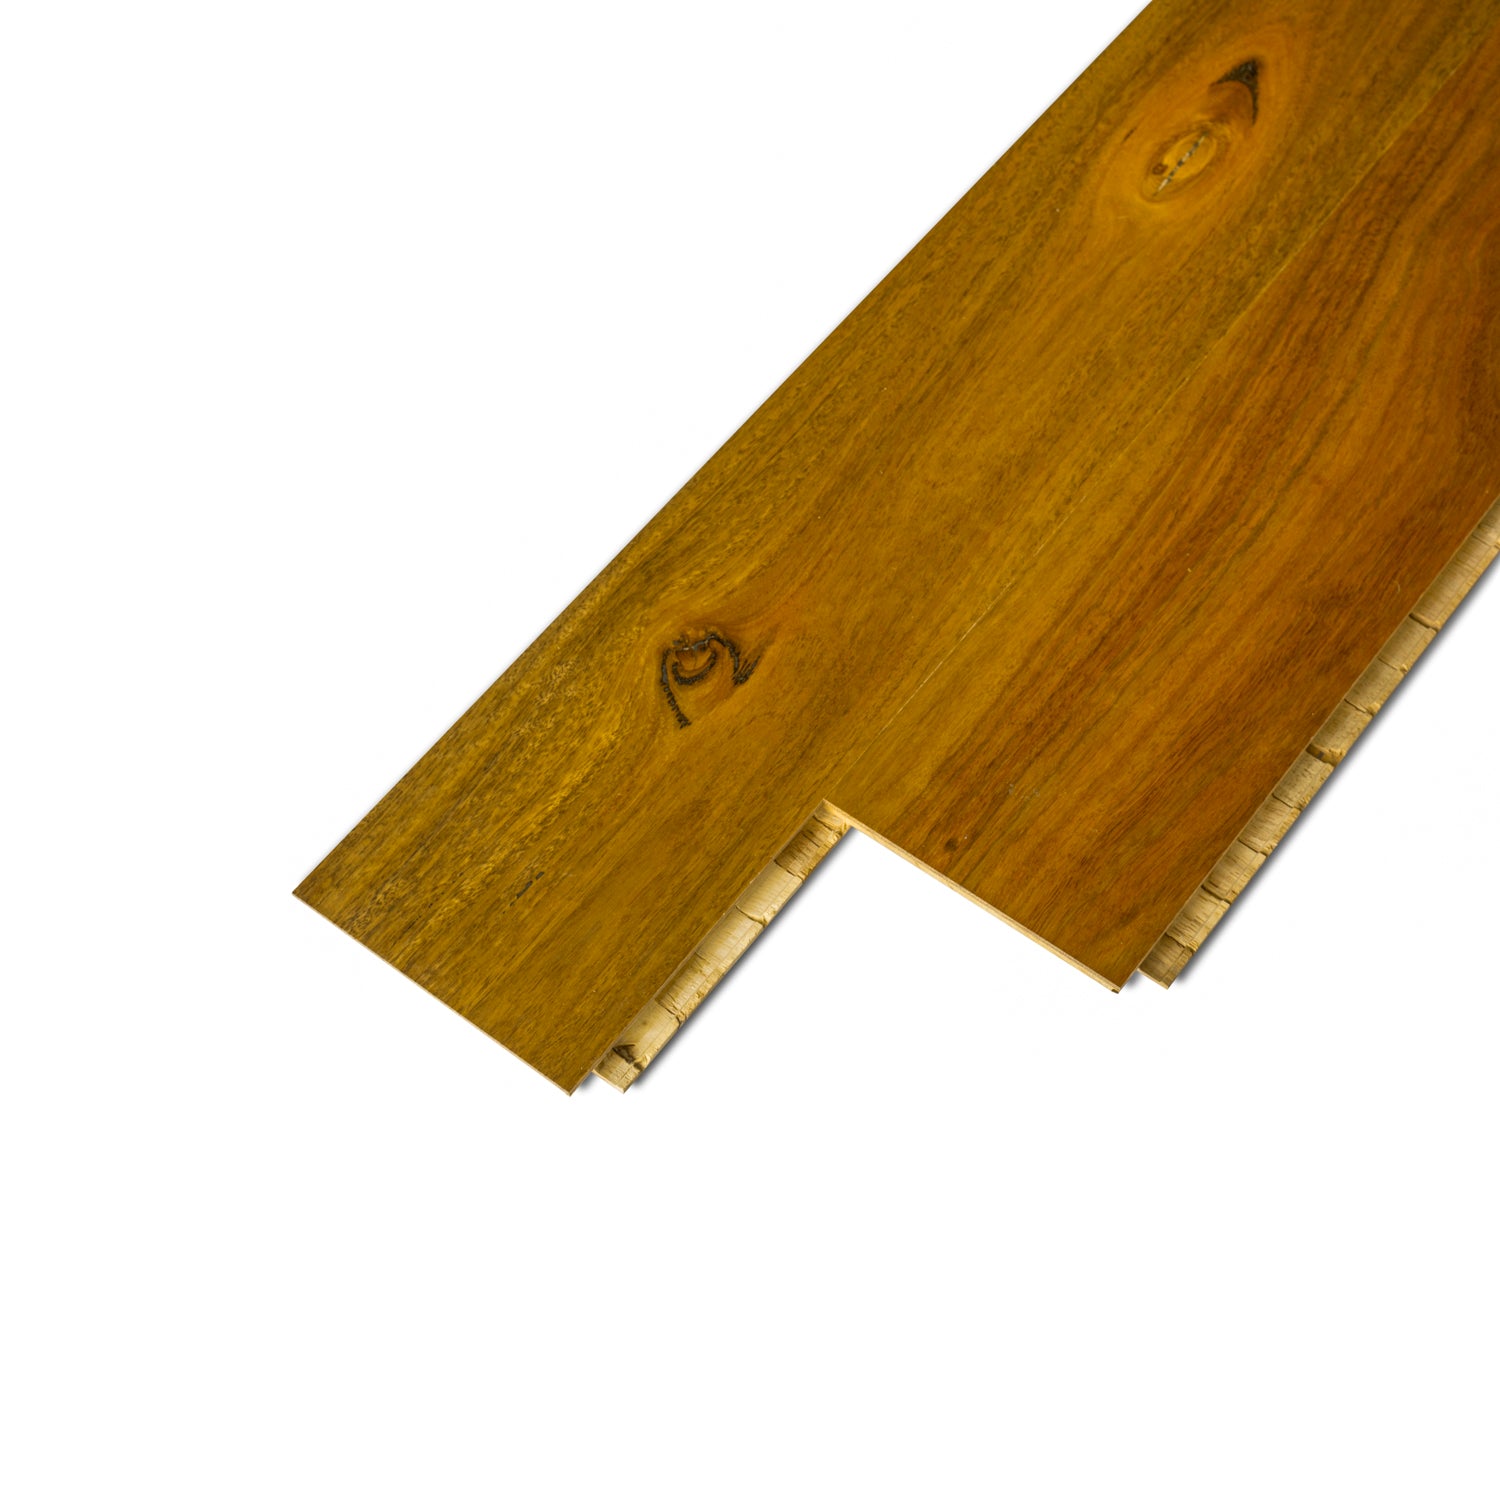 Solid Timber Flooring - Spotted Gum Feature - 80x14mm - PRICE BY